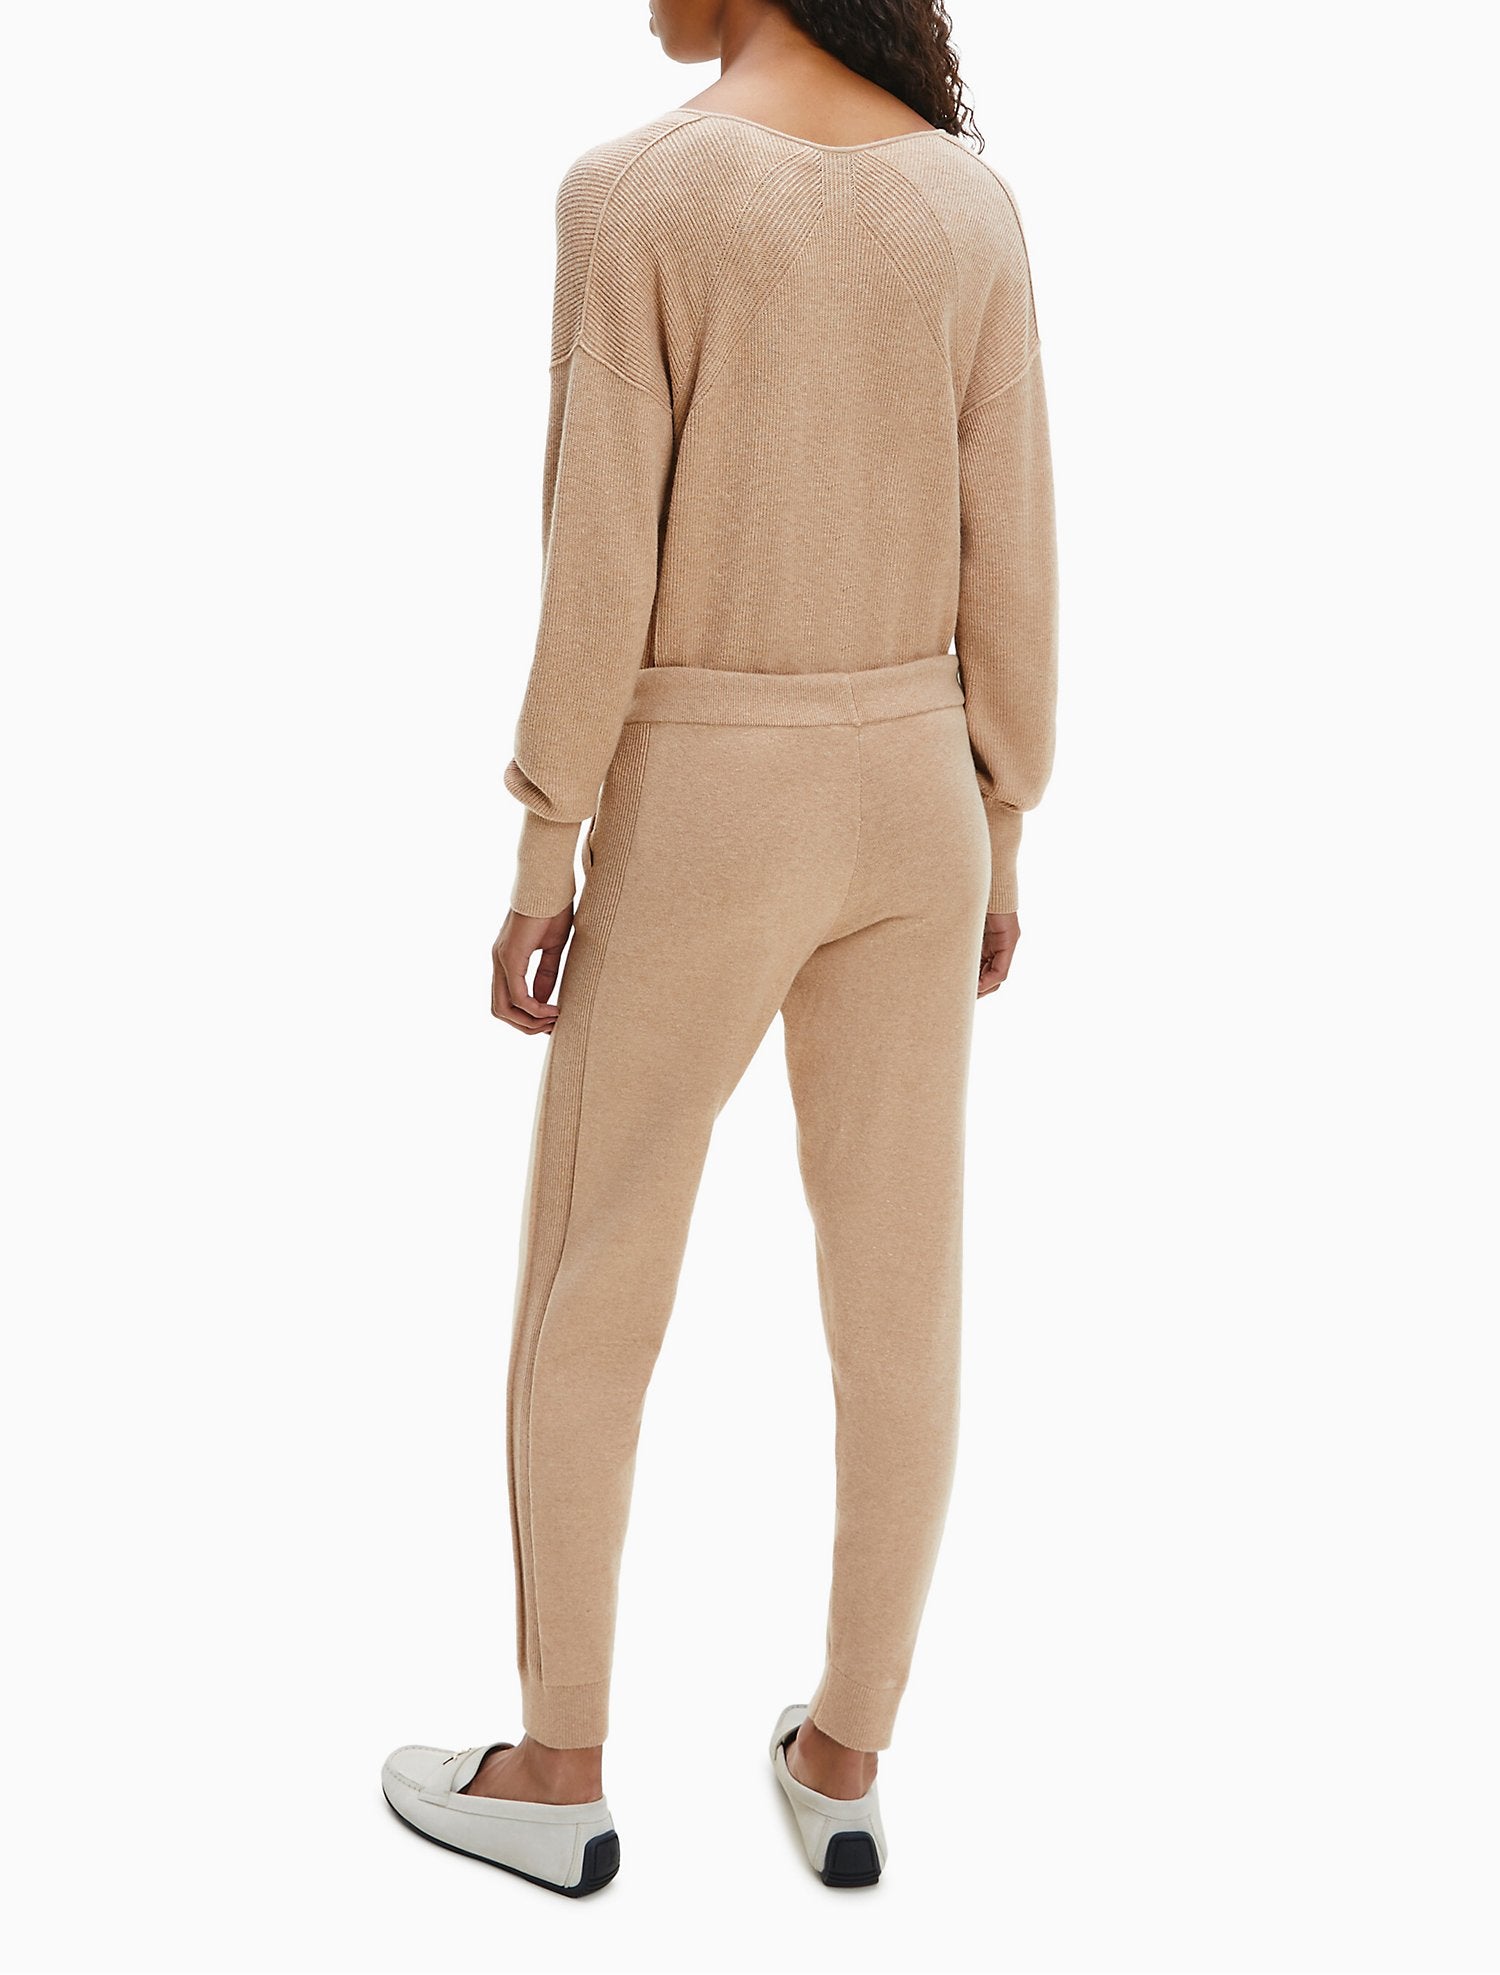 Calvin Klein Soft Ribbed Knit Joggers - Women